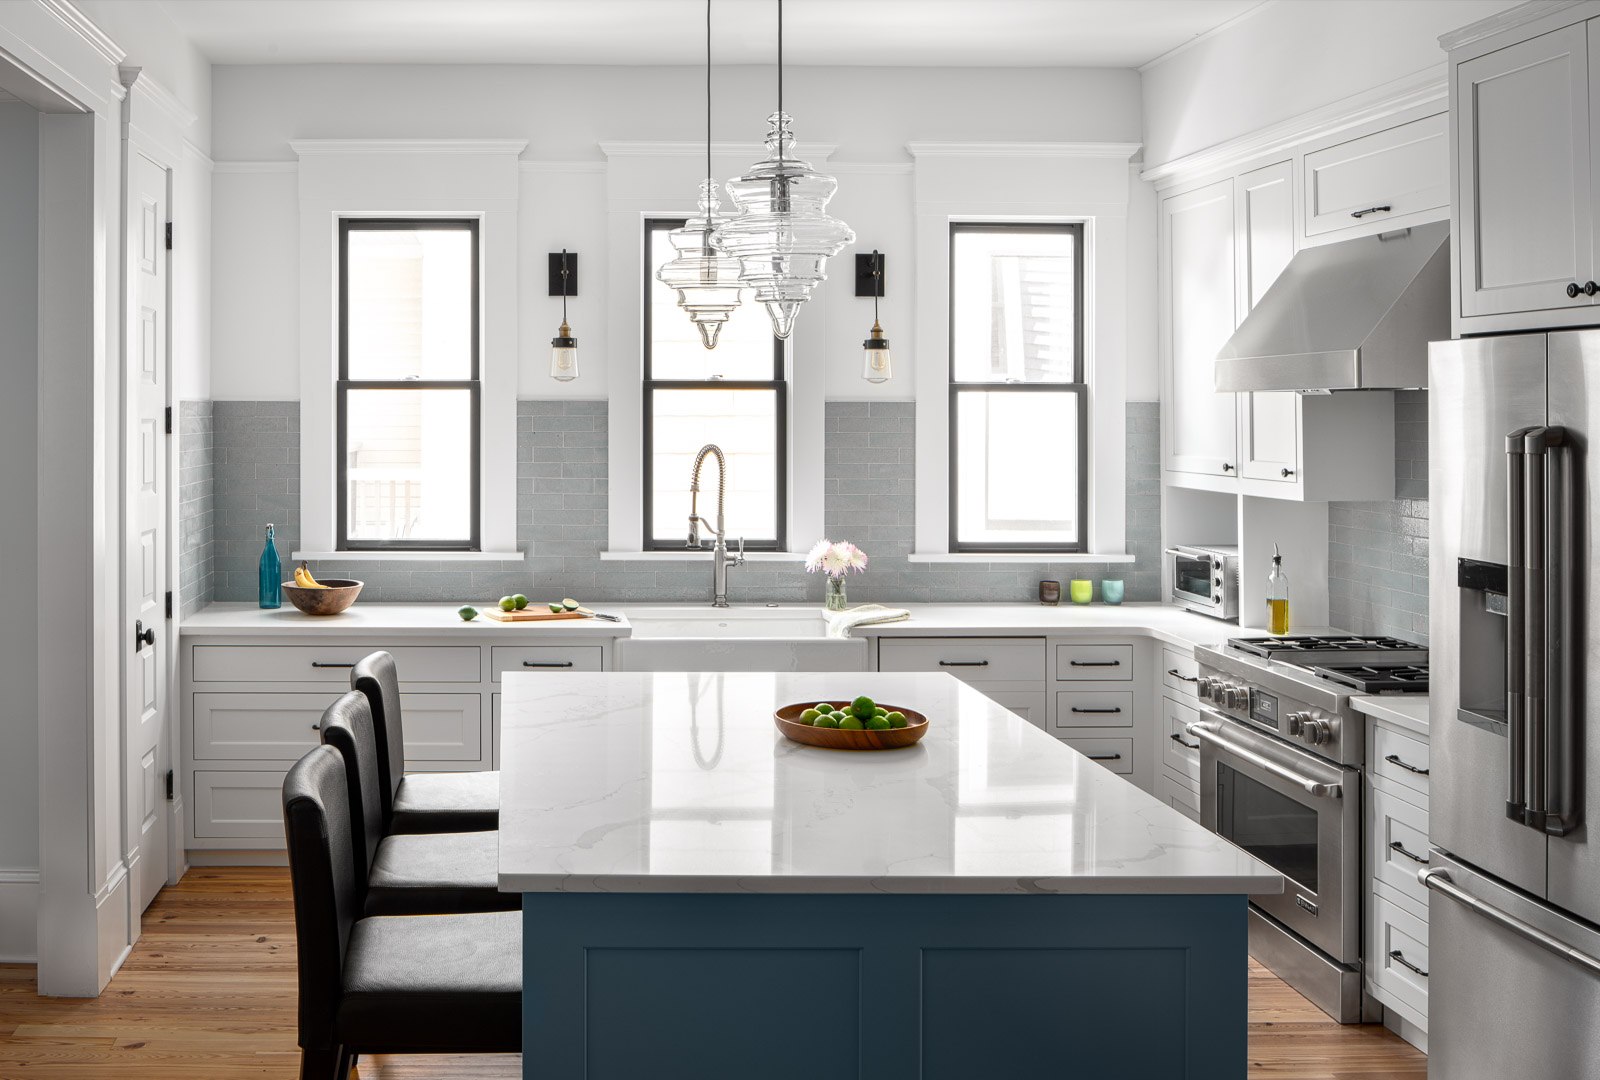 Custom Cabinetry Ideas for Your Kitchen Remodel